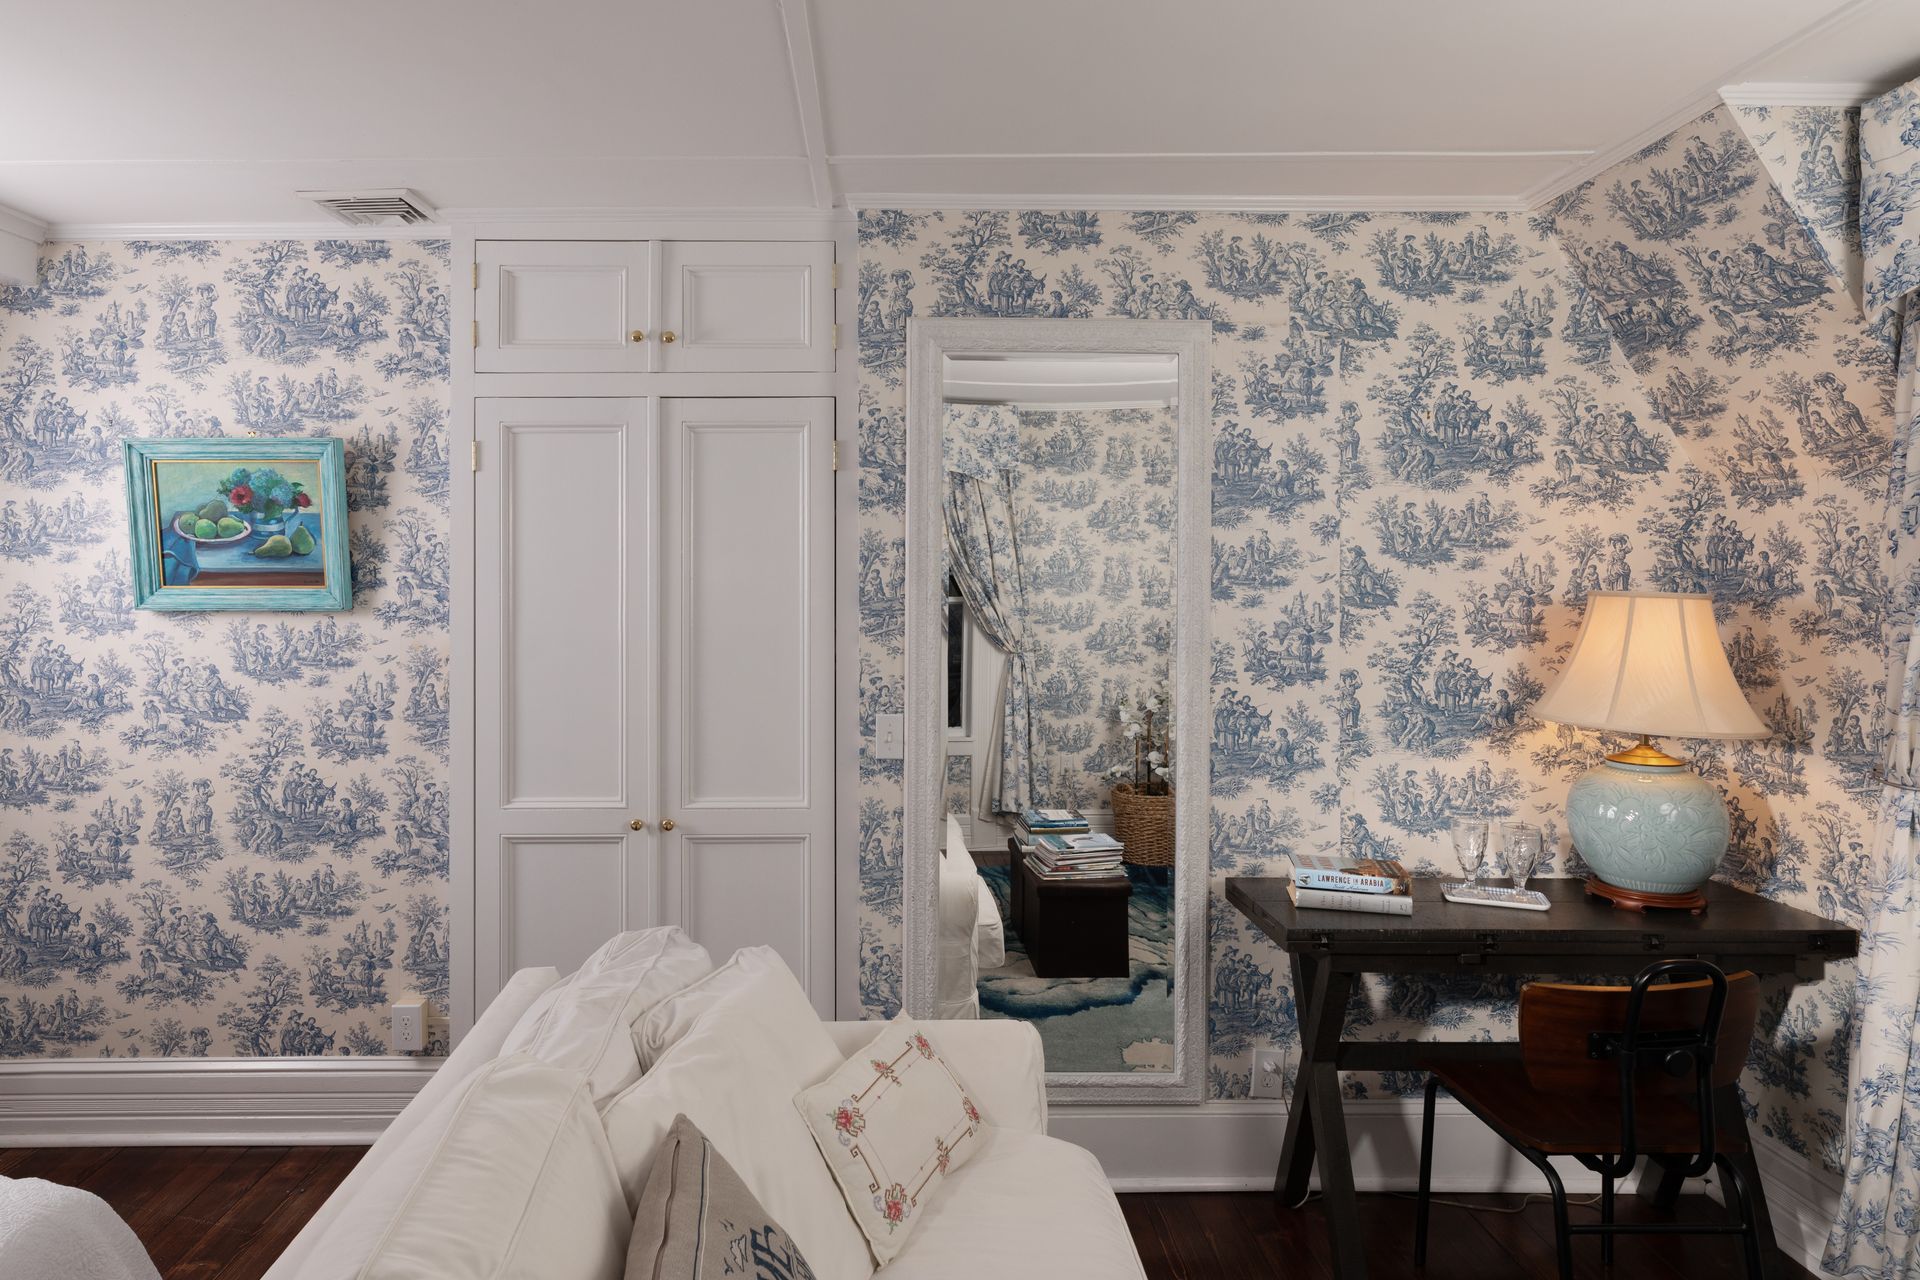 A living room with blue and white toile de jouy wallpaper